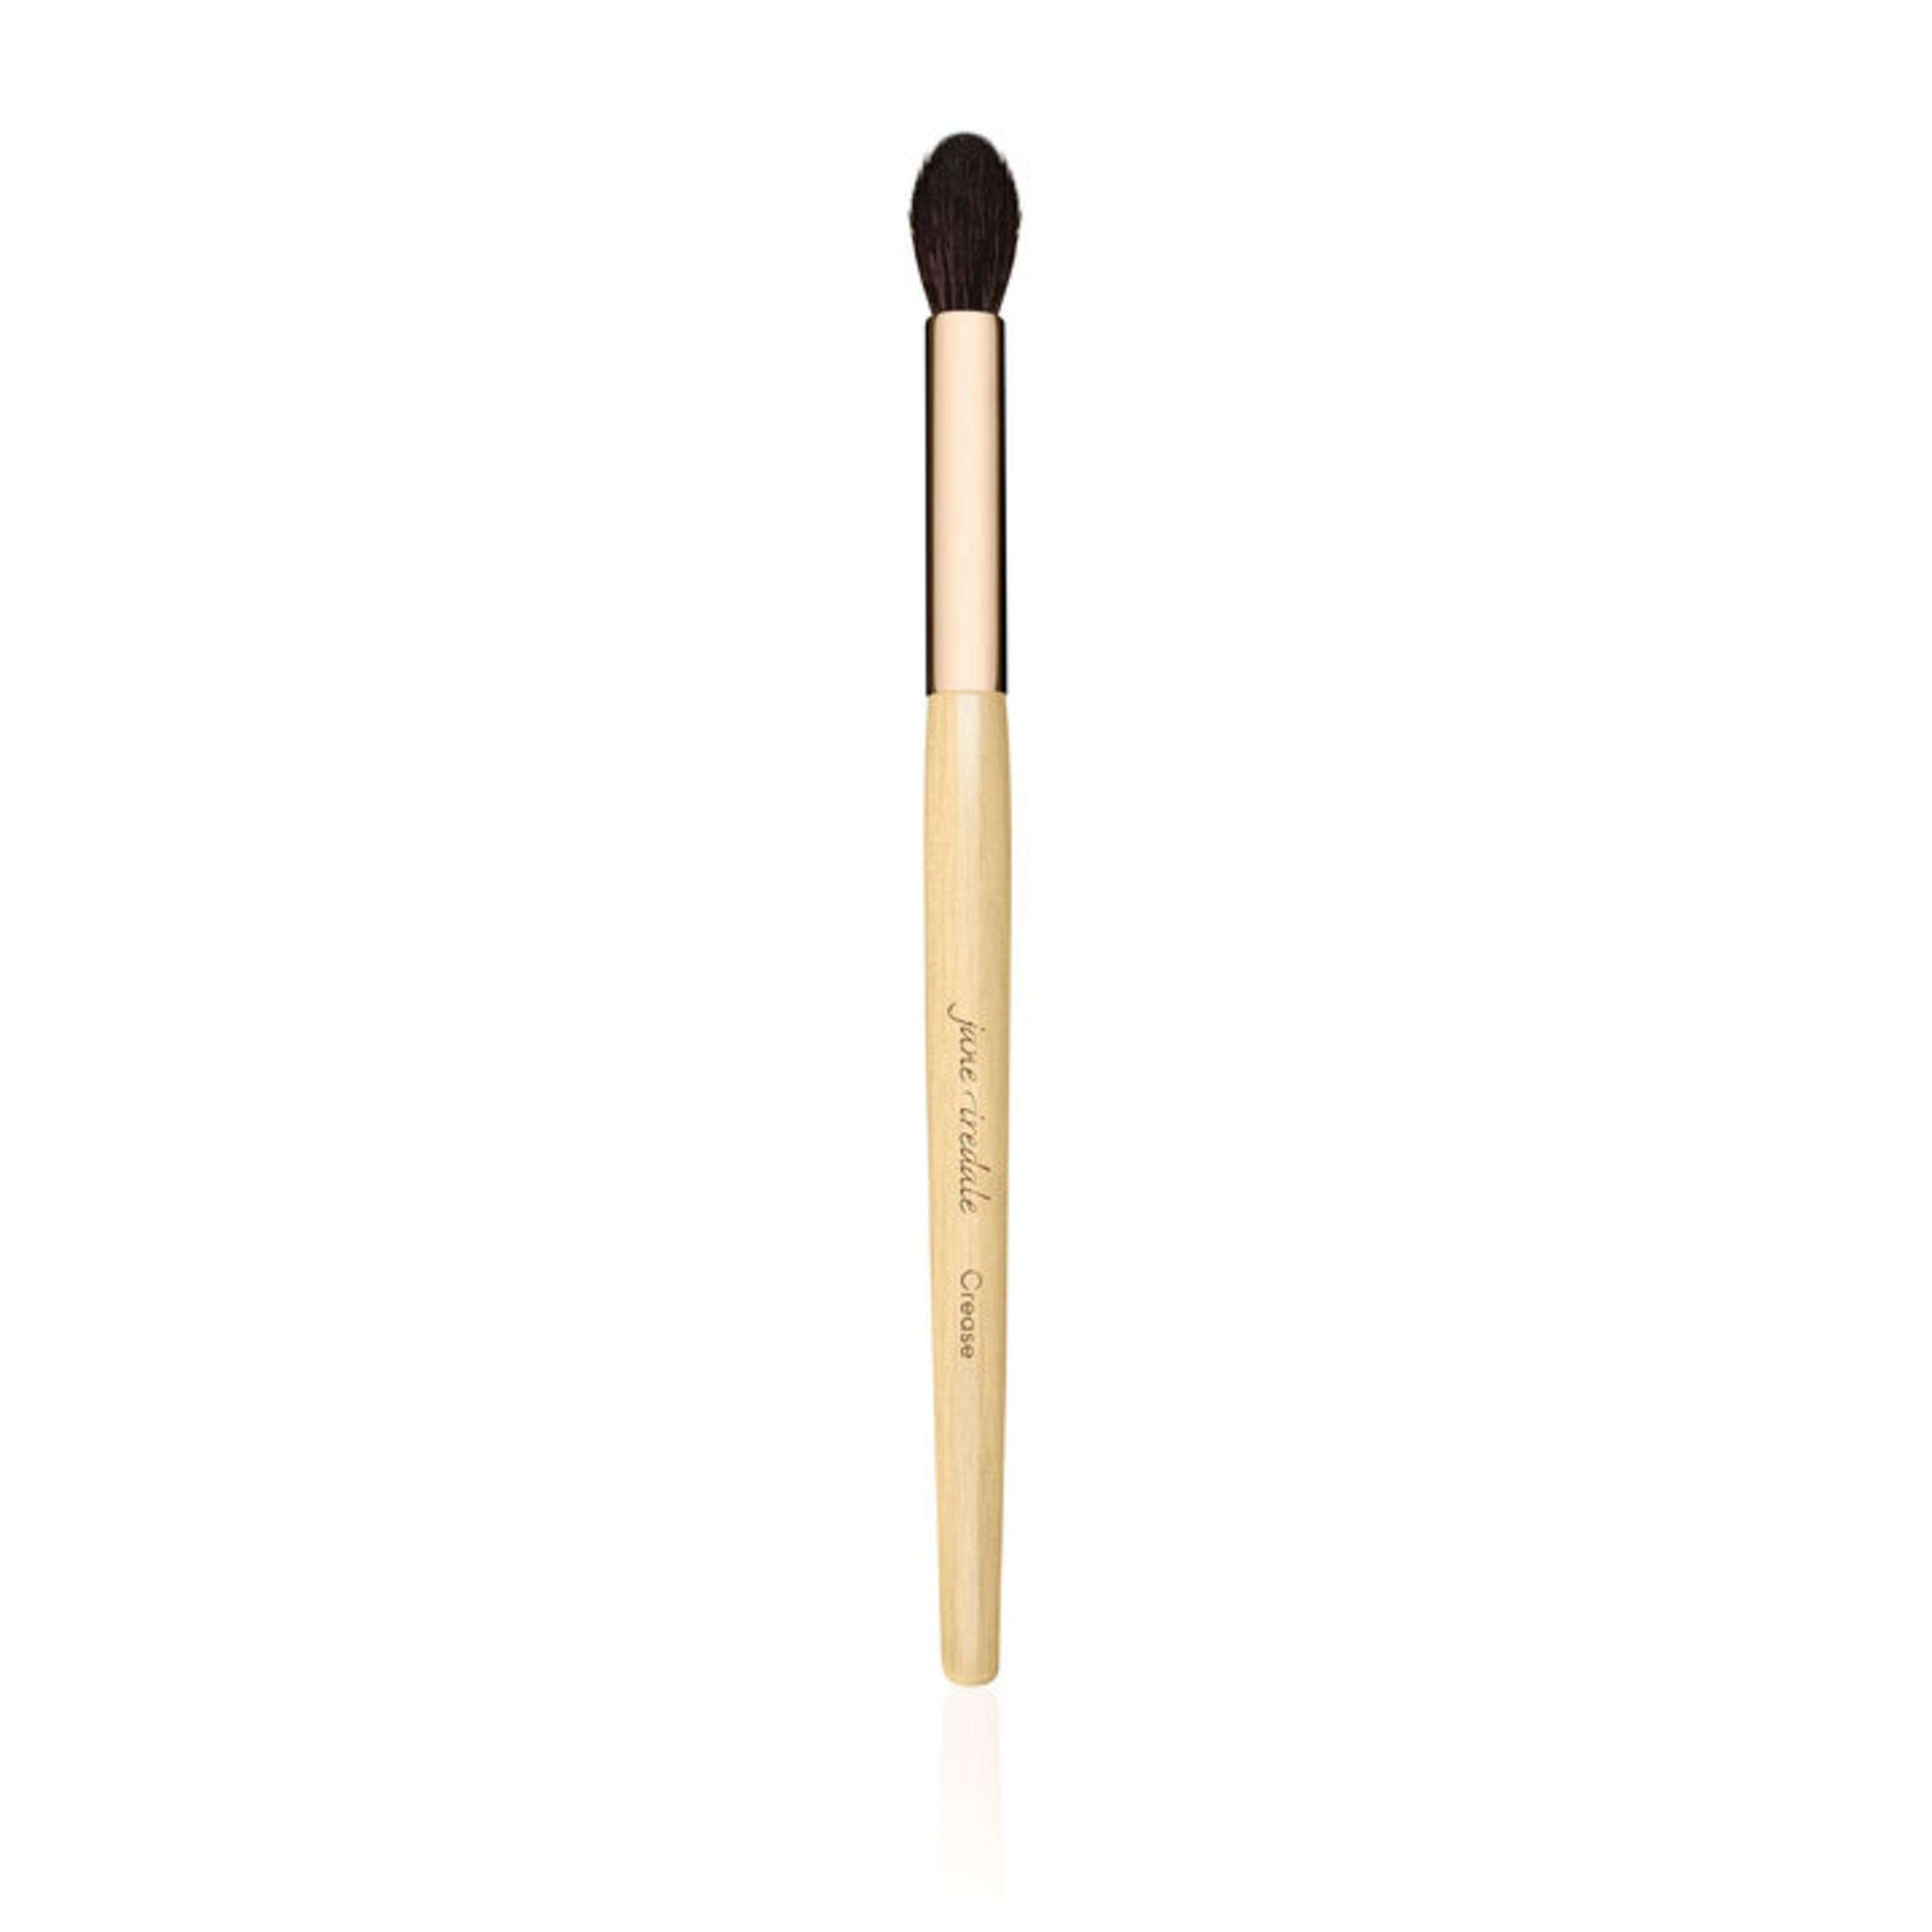 Jane Iredale Crease Brush at Socialite Beauty Canada